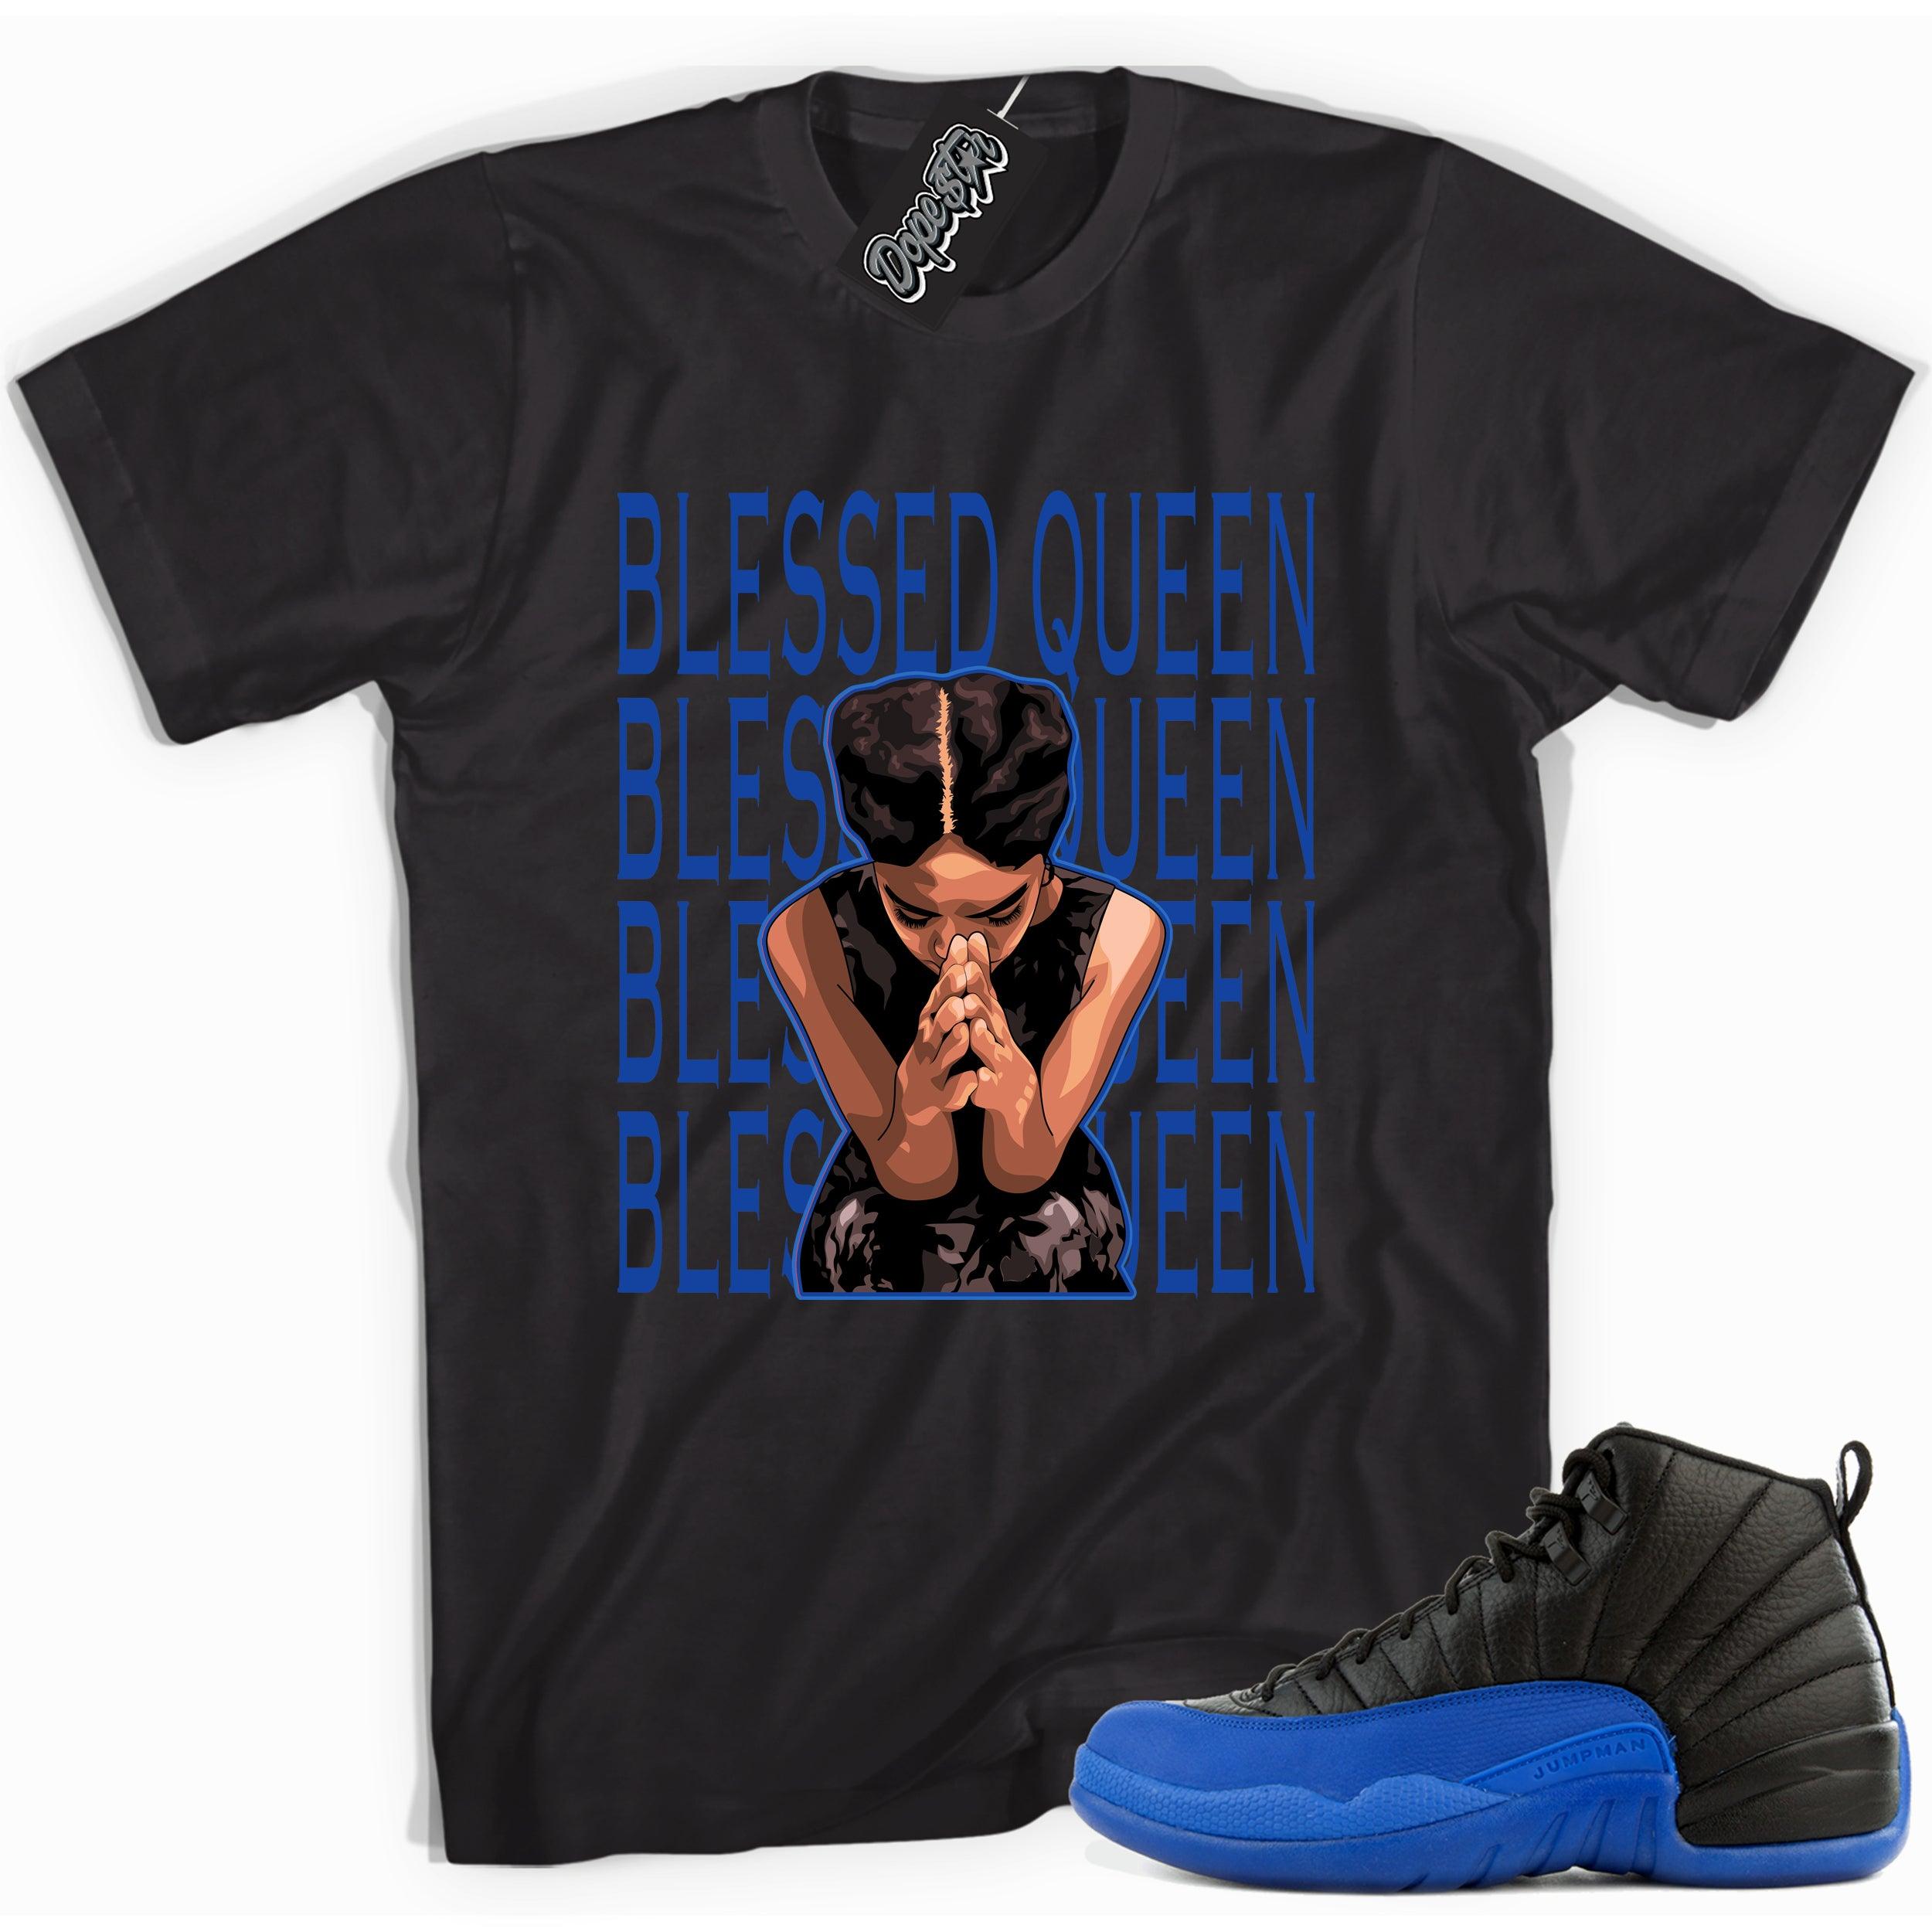 Cool black graphic tee with 'blessed queen' print, that perfectly matches  Air Jordan 12 Retro Black Game Royal sneakers.